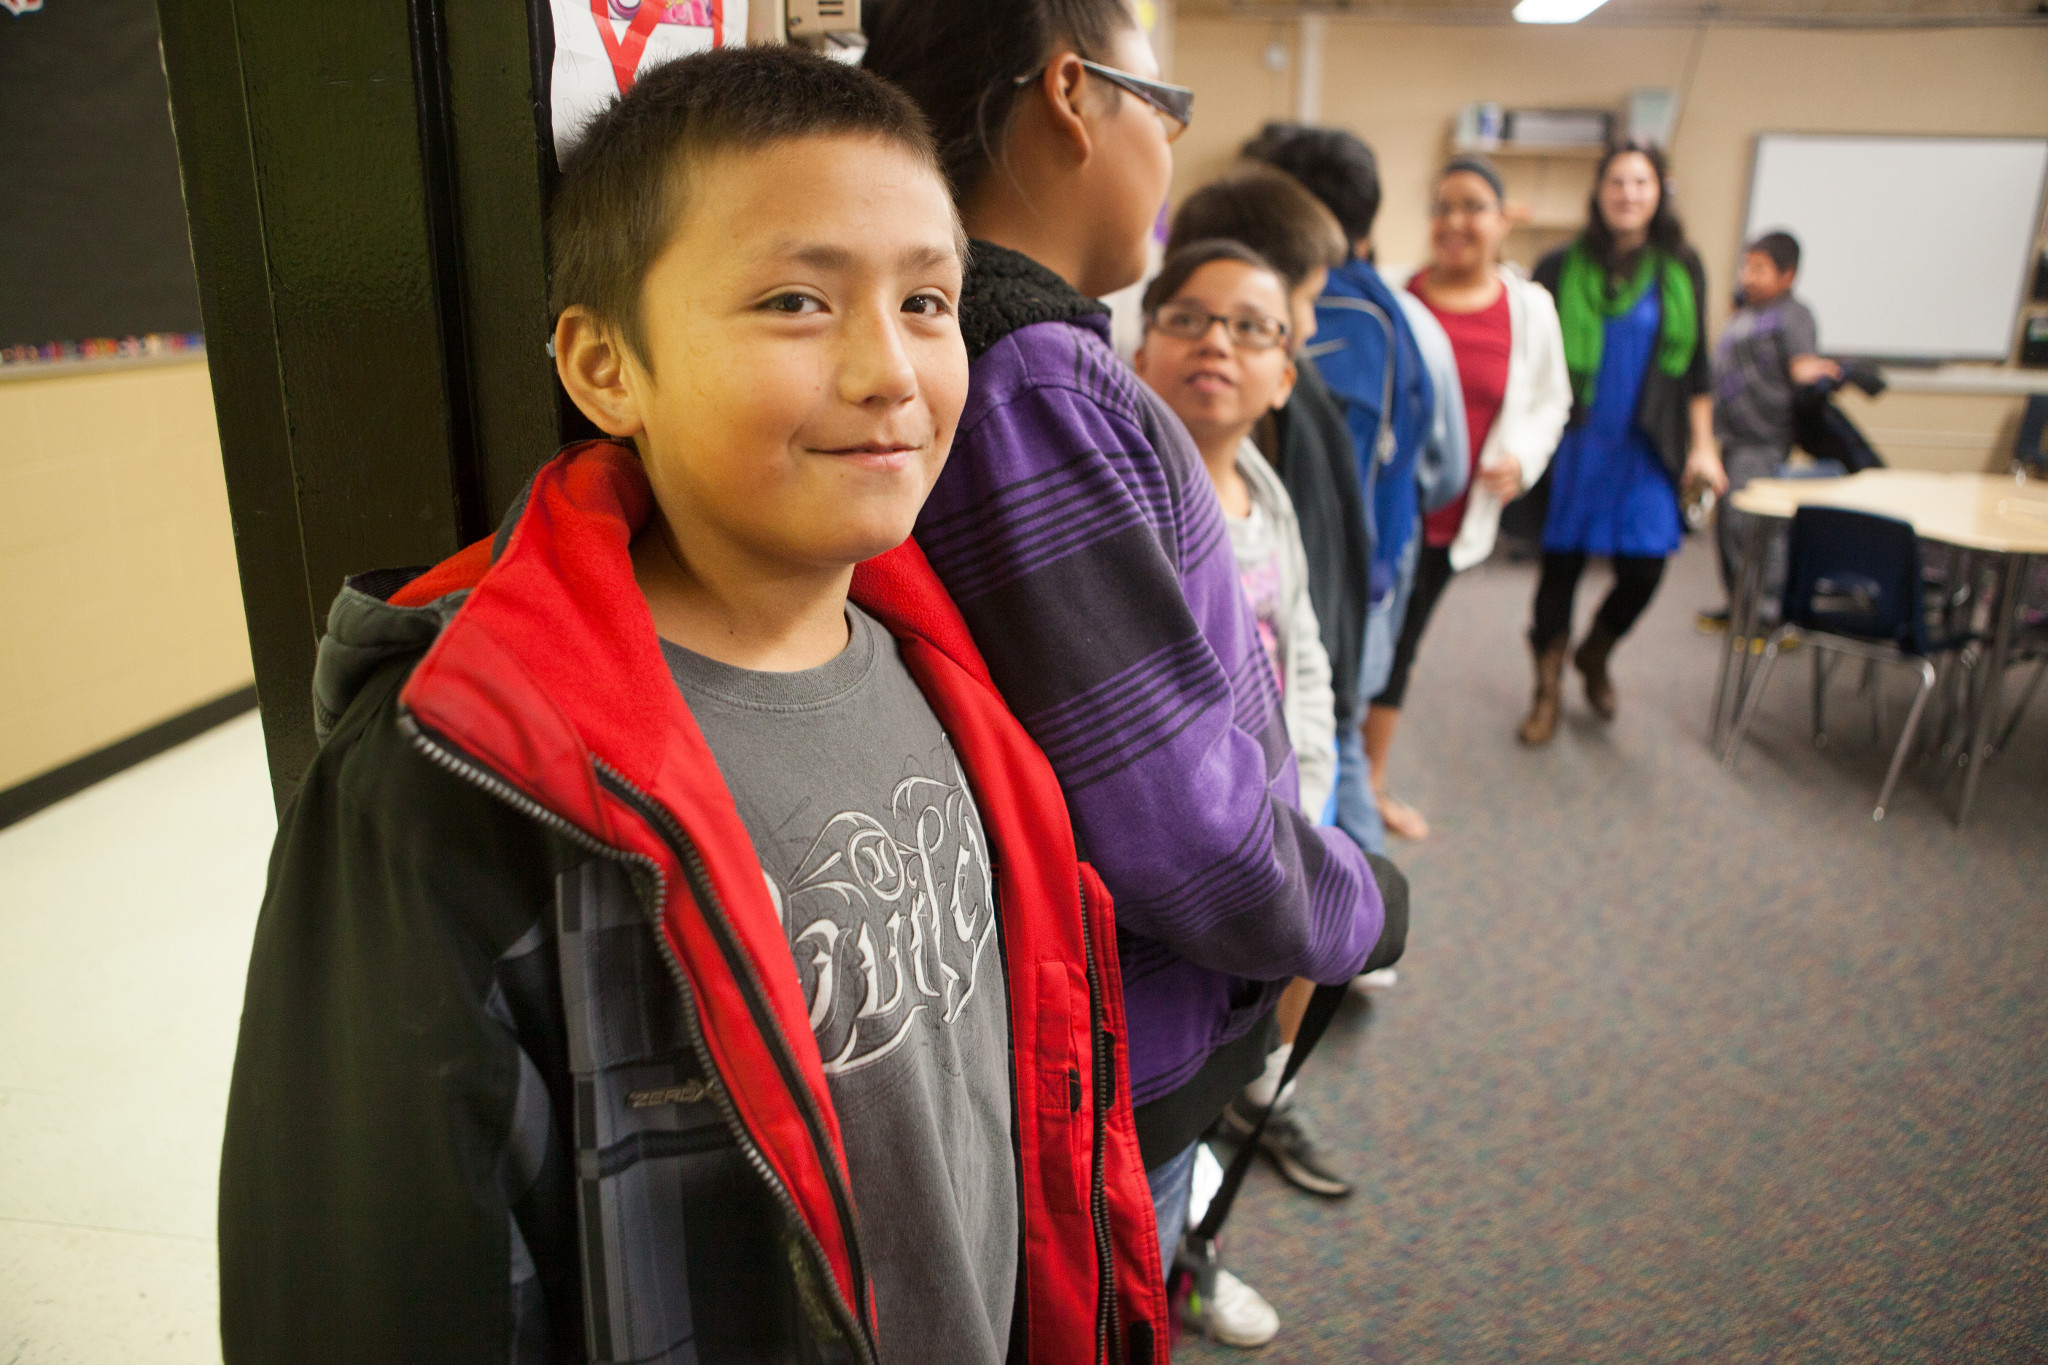 Why are Native Students Being Left Behind?